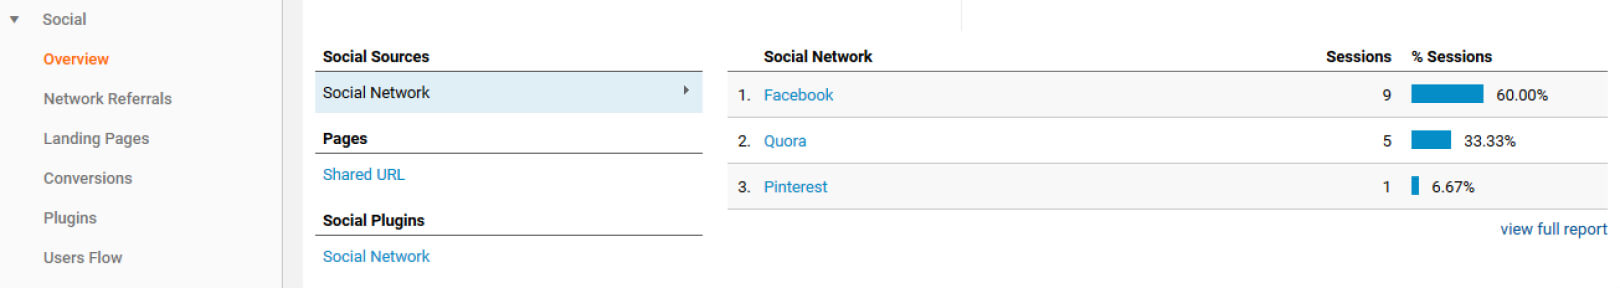 Have a Social Calendar and Posting Strategy